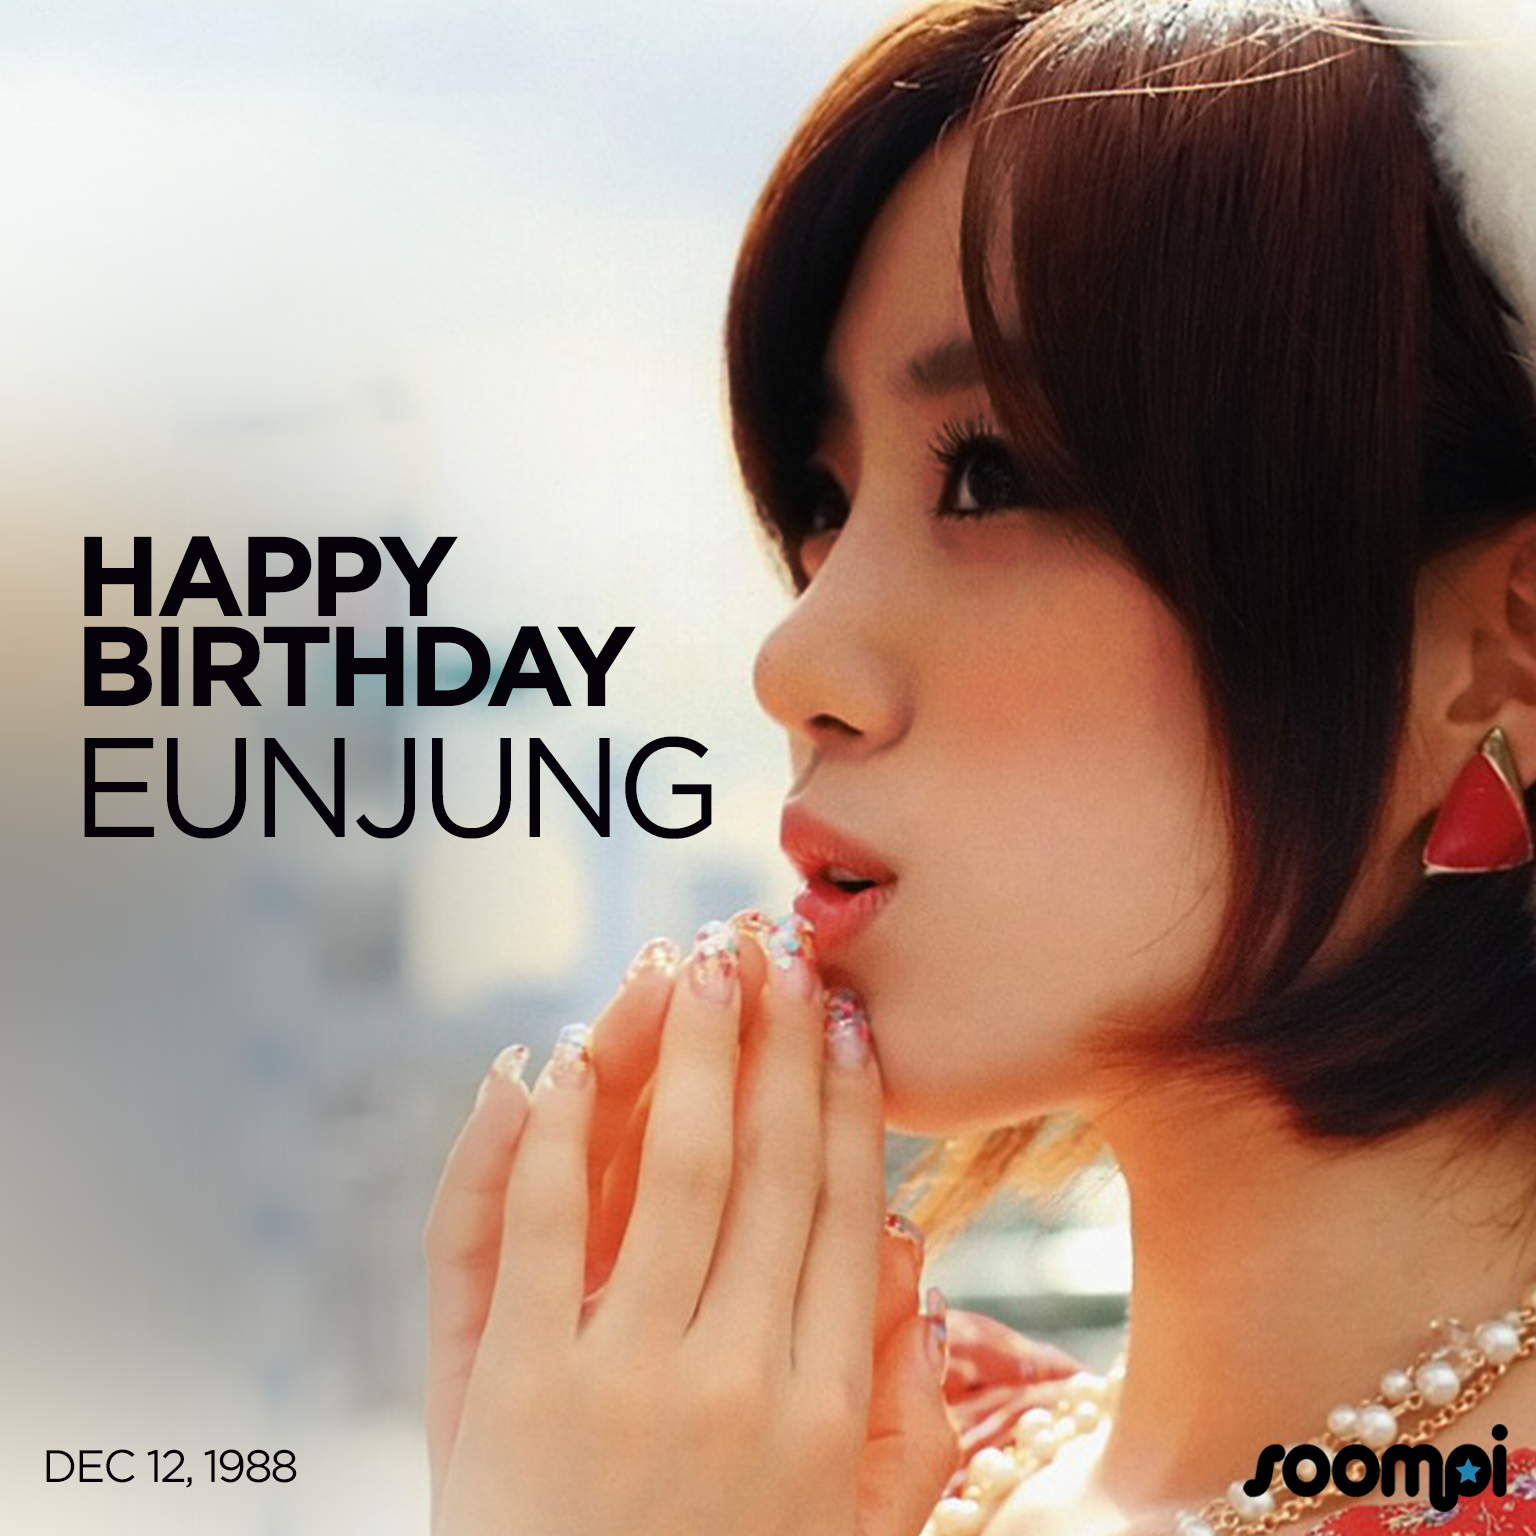 Happy Birthday to Eunjung! Celebrate by watching her on 